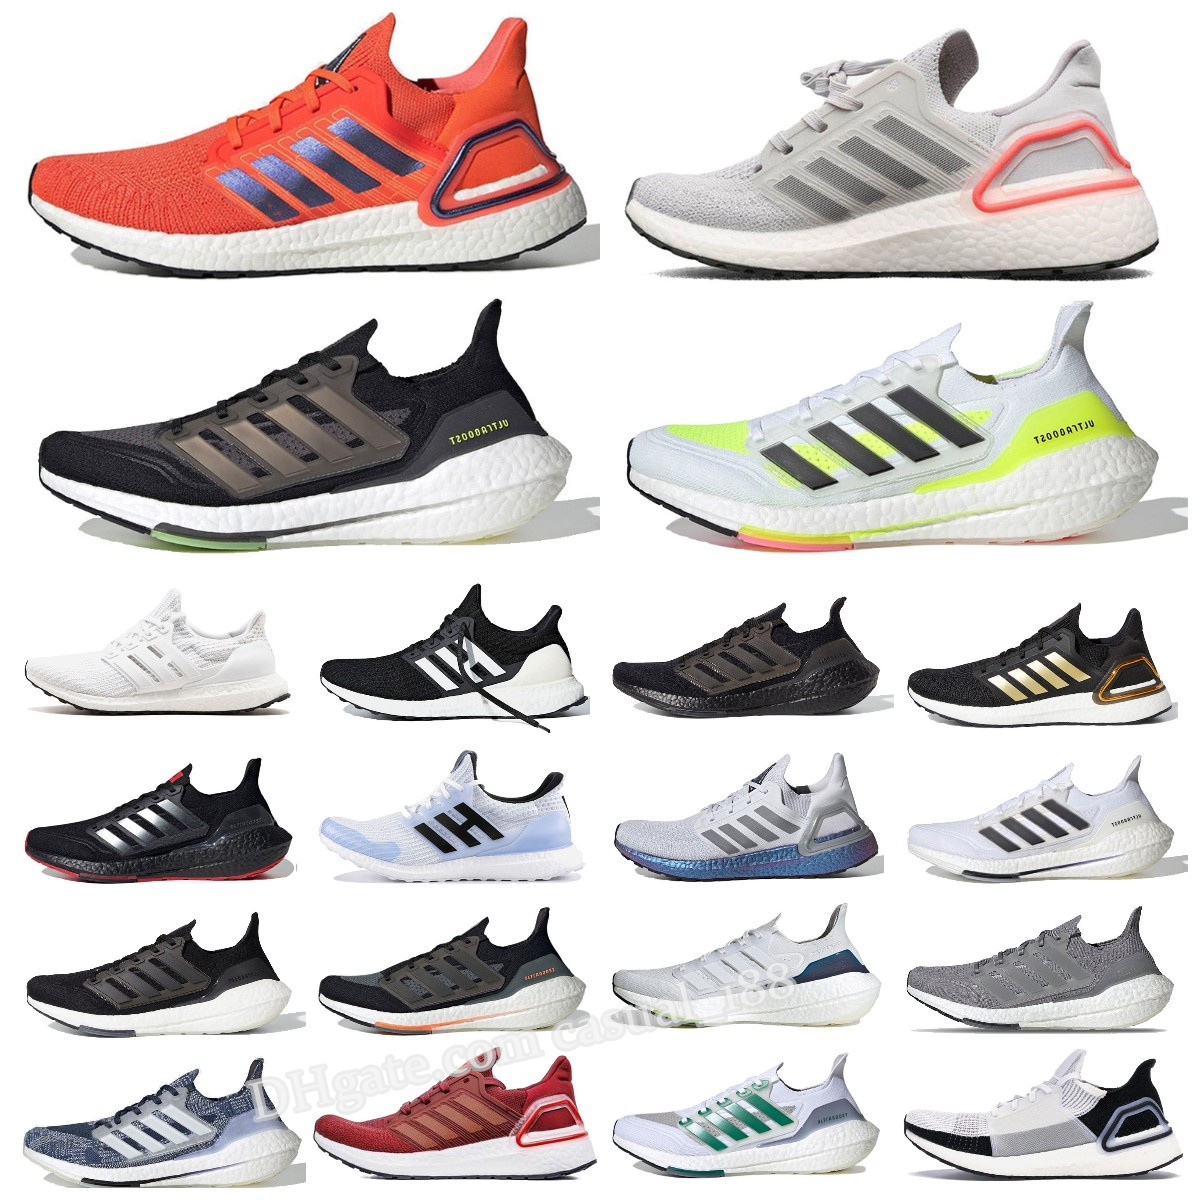 Running casual Shoes Women designer Sneakers Carbon Scarlet Core Black Sub Green Triple White Ash Peach Men Sports 21 4.0 UltraboostS Og Mens Ultra Boosts Bred 5.0 6.0, Bubble column